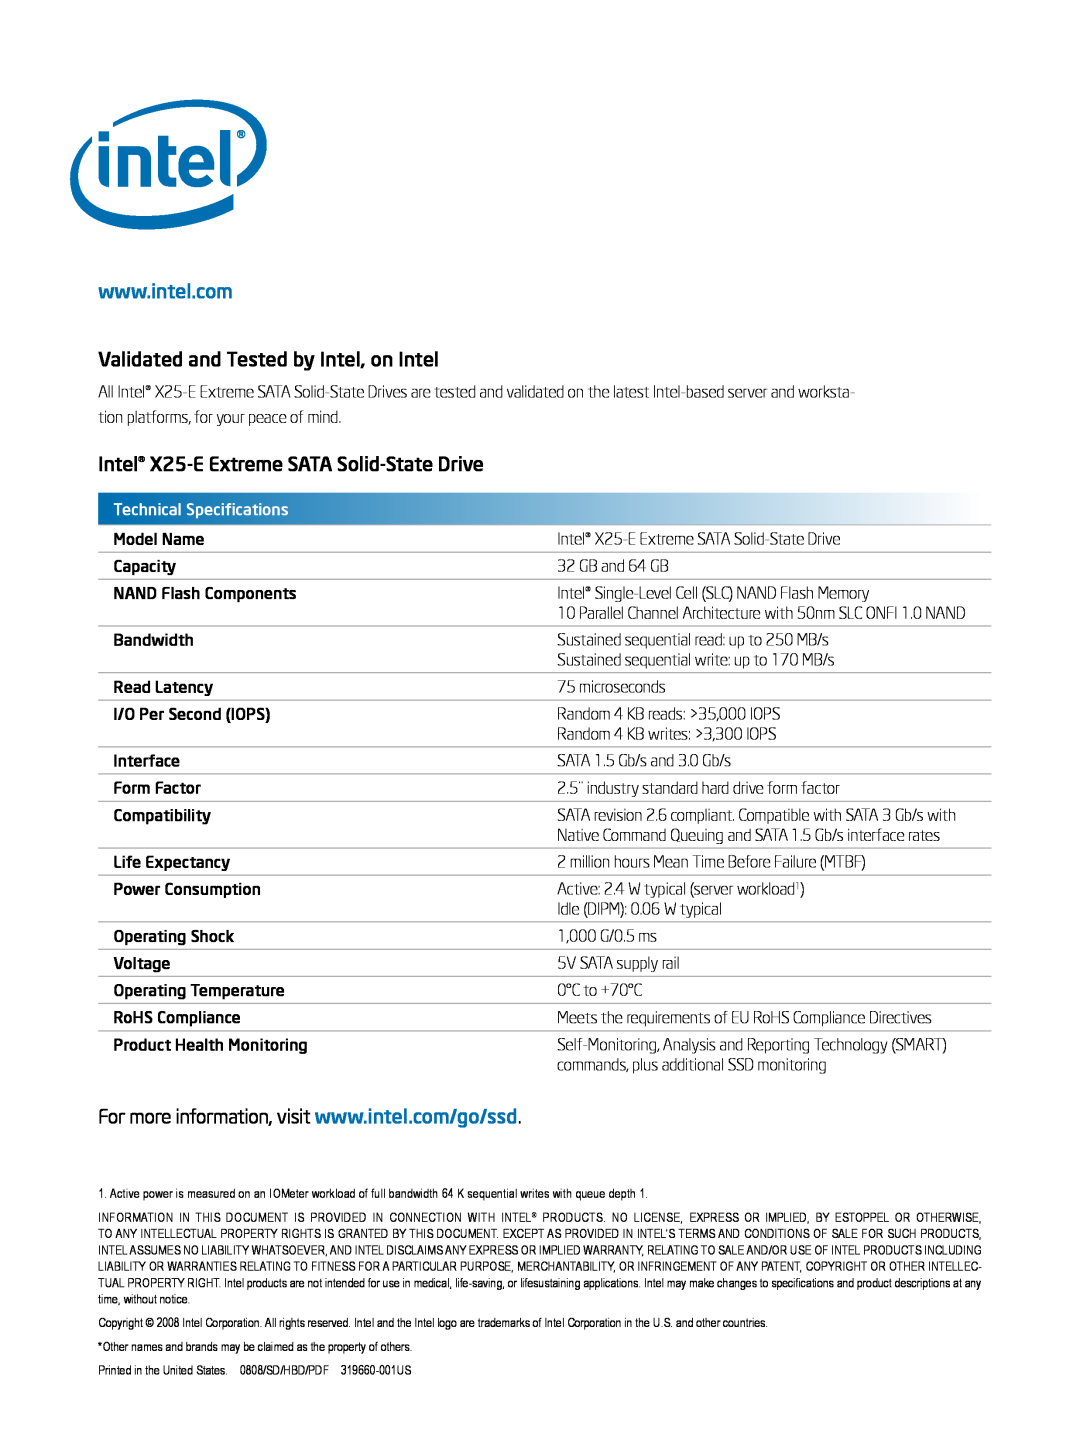 Intel manual Validated and Tested by Intel, on Intel, Intel X25-EExtreme SATA Solid-StateDrive, Technical Specifications 